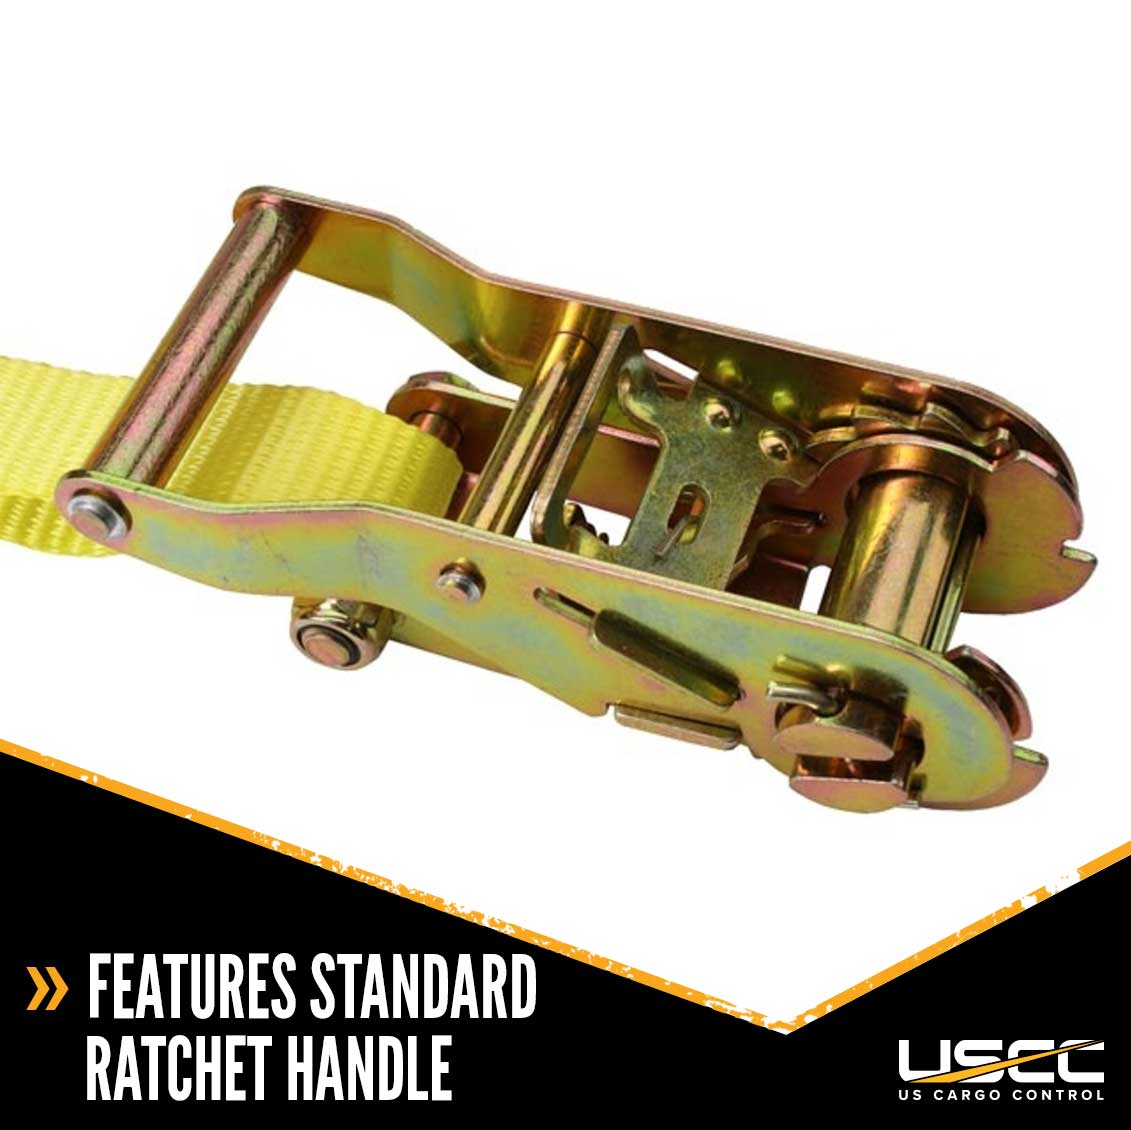 1 inch x 15 foot Ratchet Strap w SHook image 3 of 9